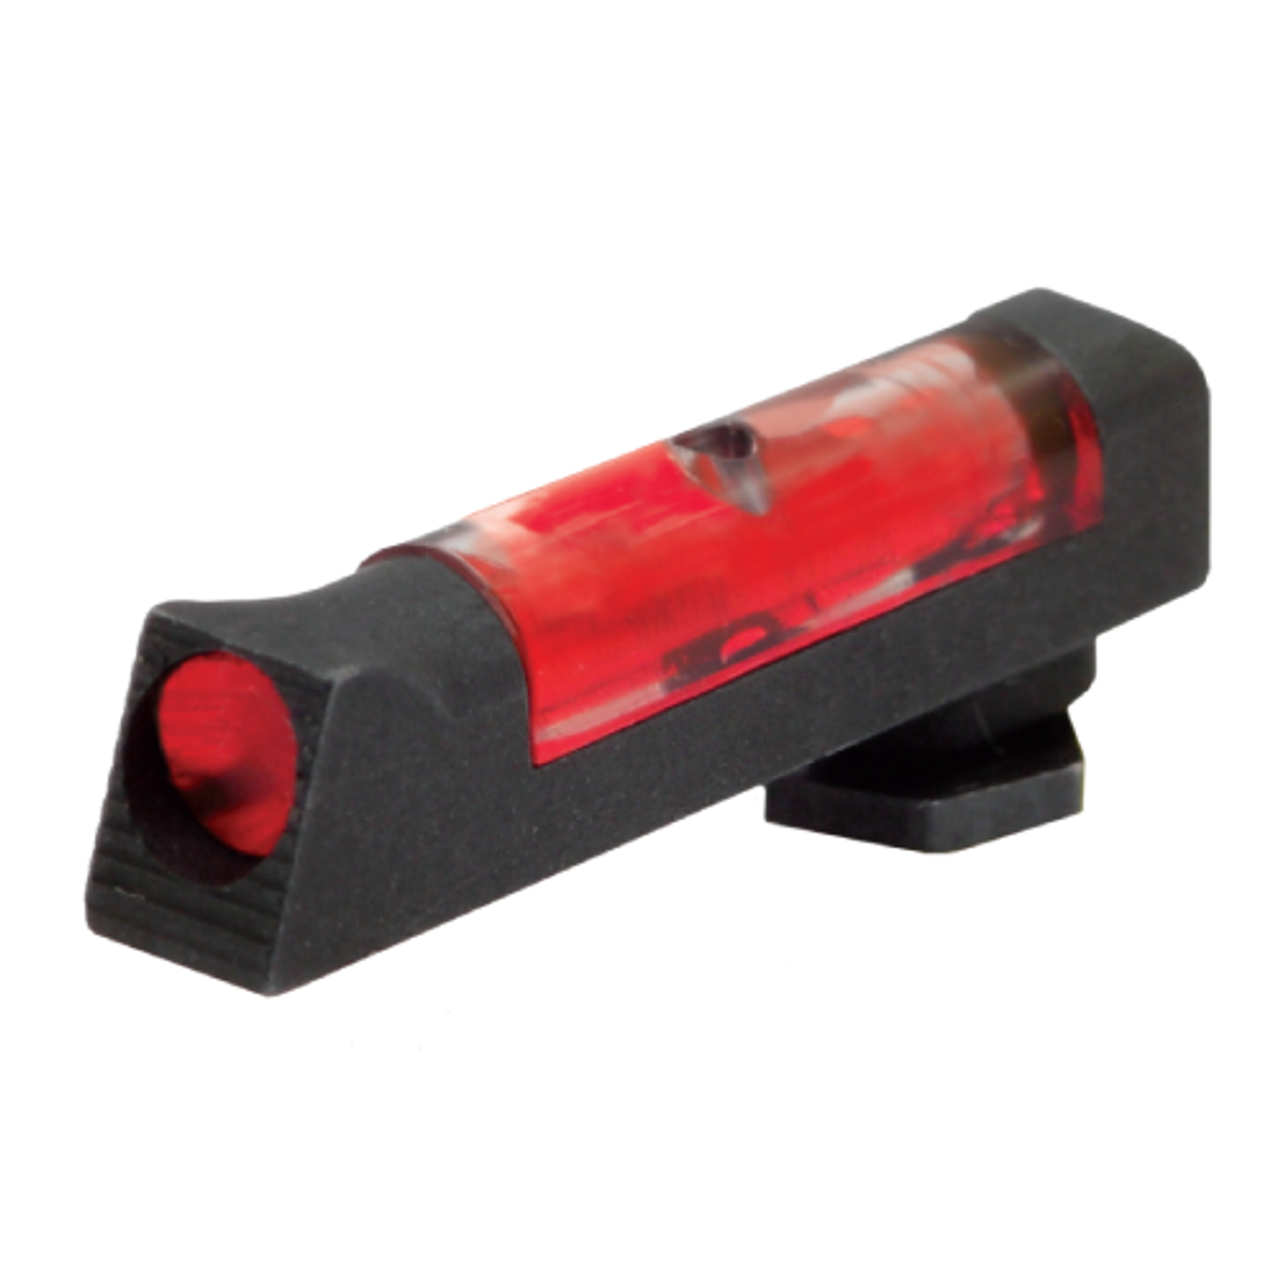 HiViz Tactical Front Sight for Glock, Red